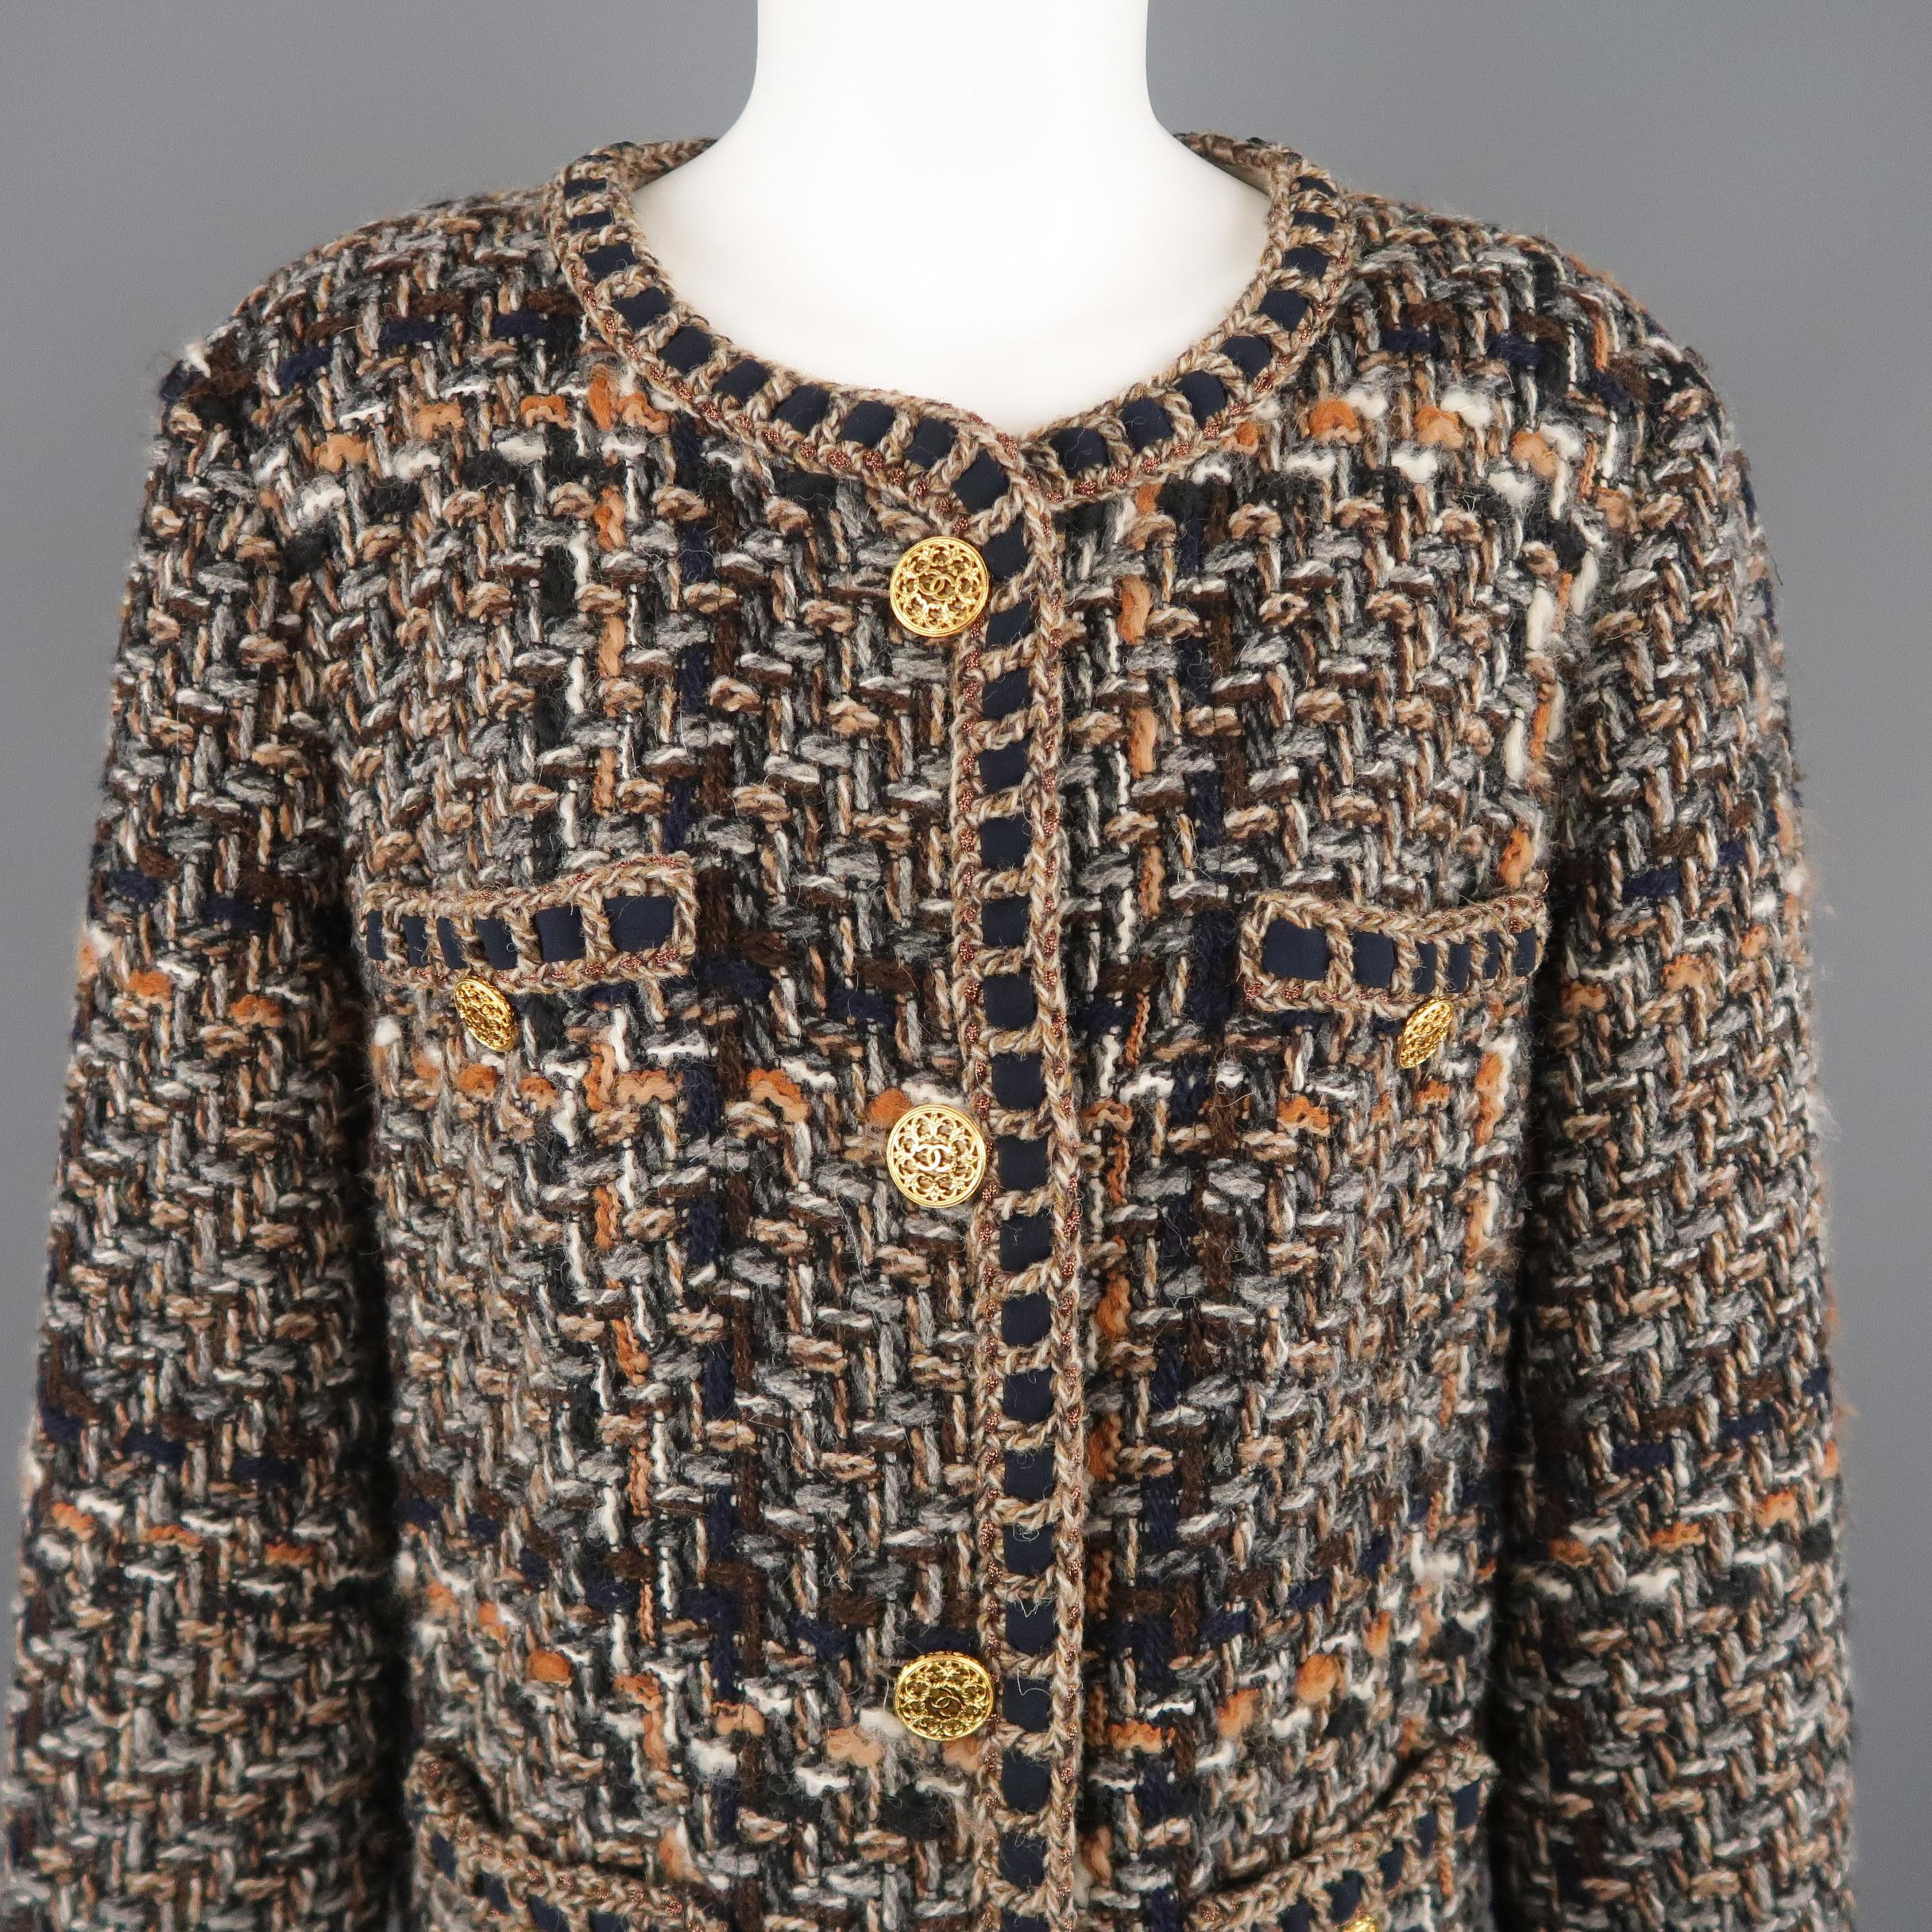 CHANEL winter jacket comes in chunky textured taupe wool blend tweed with hues of browns, grays, and navy throughout,  yellow gold tone metal CC emblem cutout statement buttons, round, collarless neckline, frontal slit button pockets, navy silk